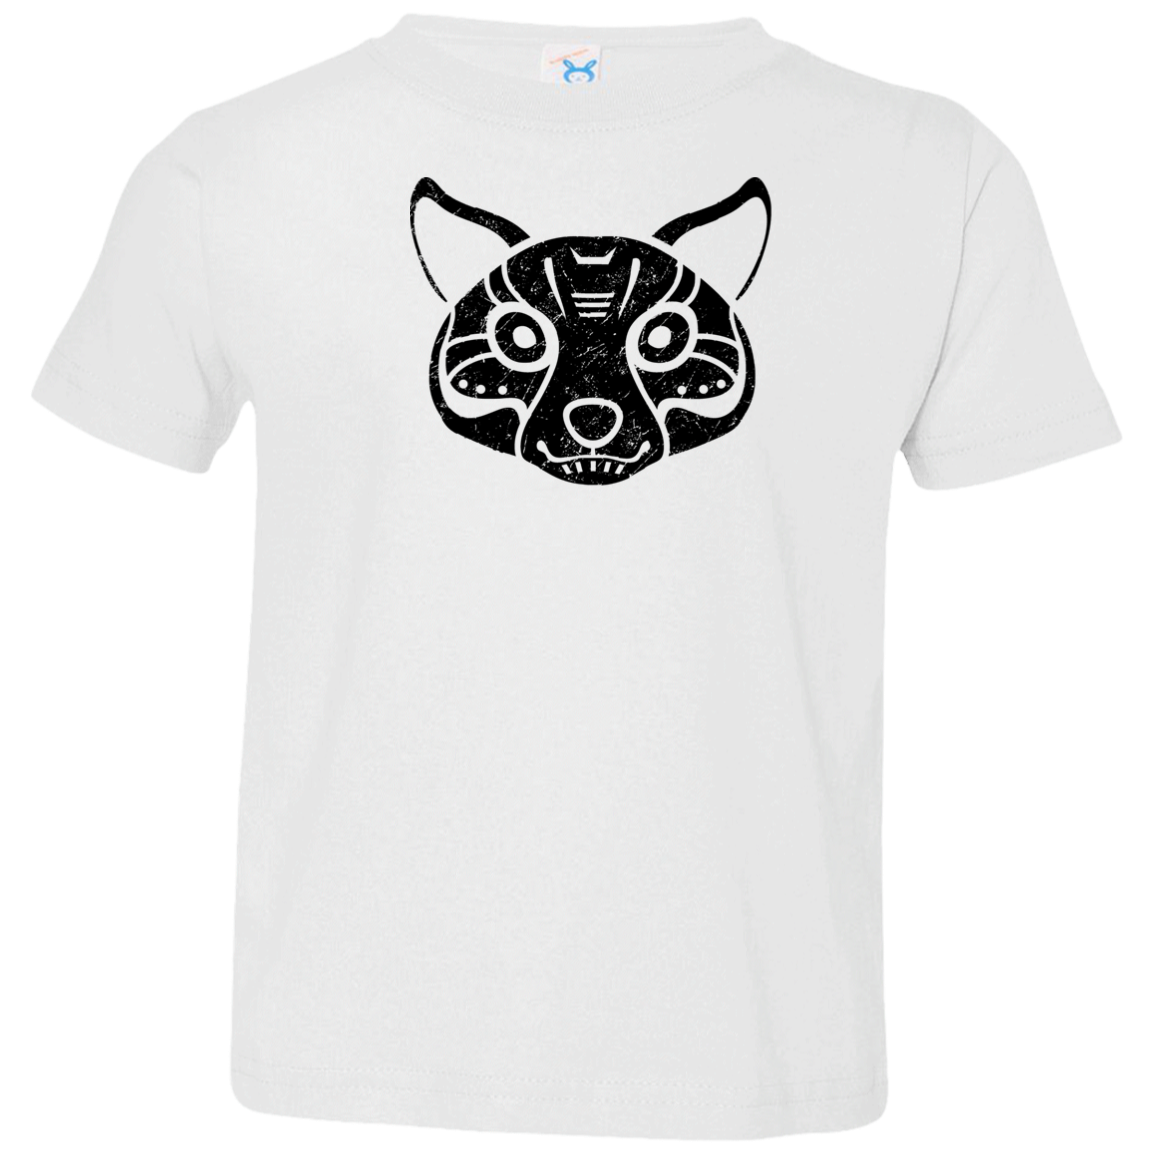 Black Distressed Emblem T-Shirt for Toddlers (Coyote/Coy)